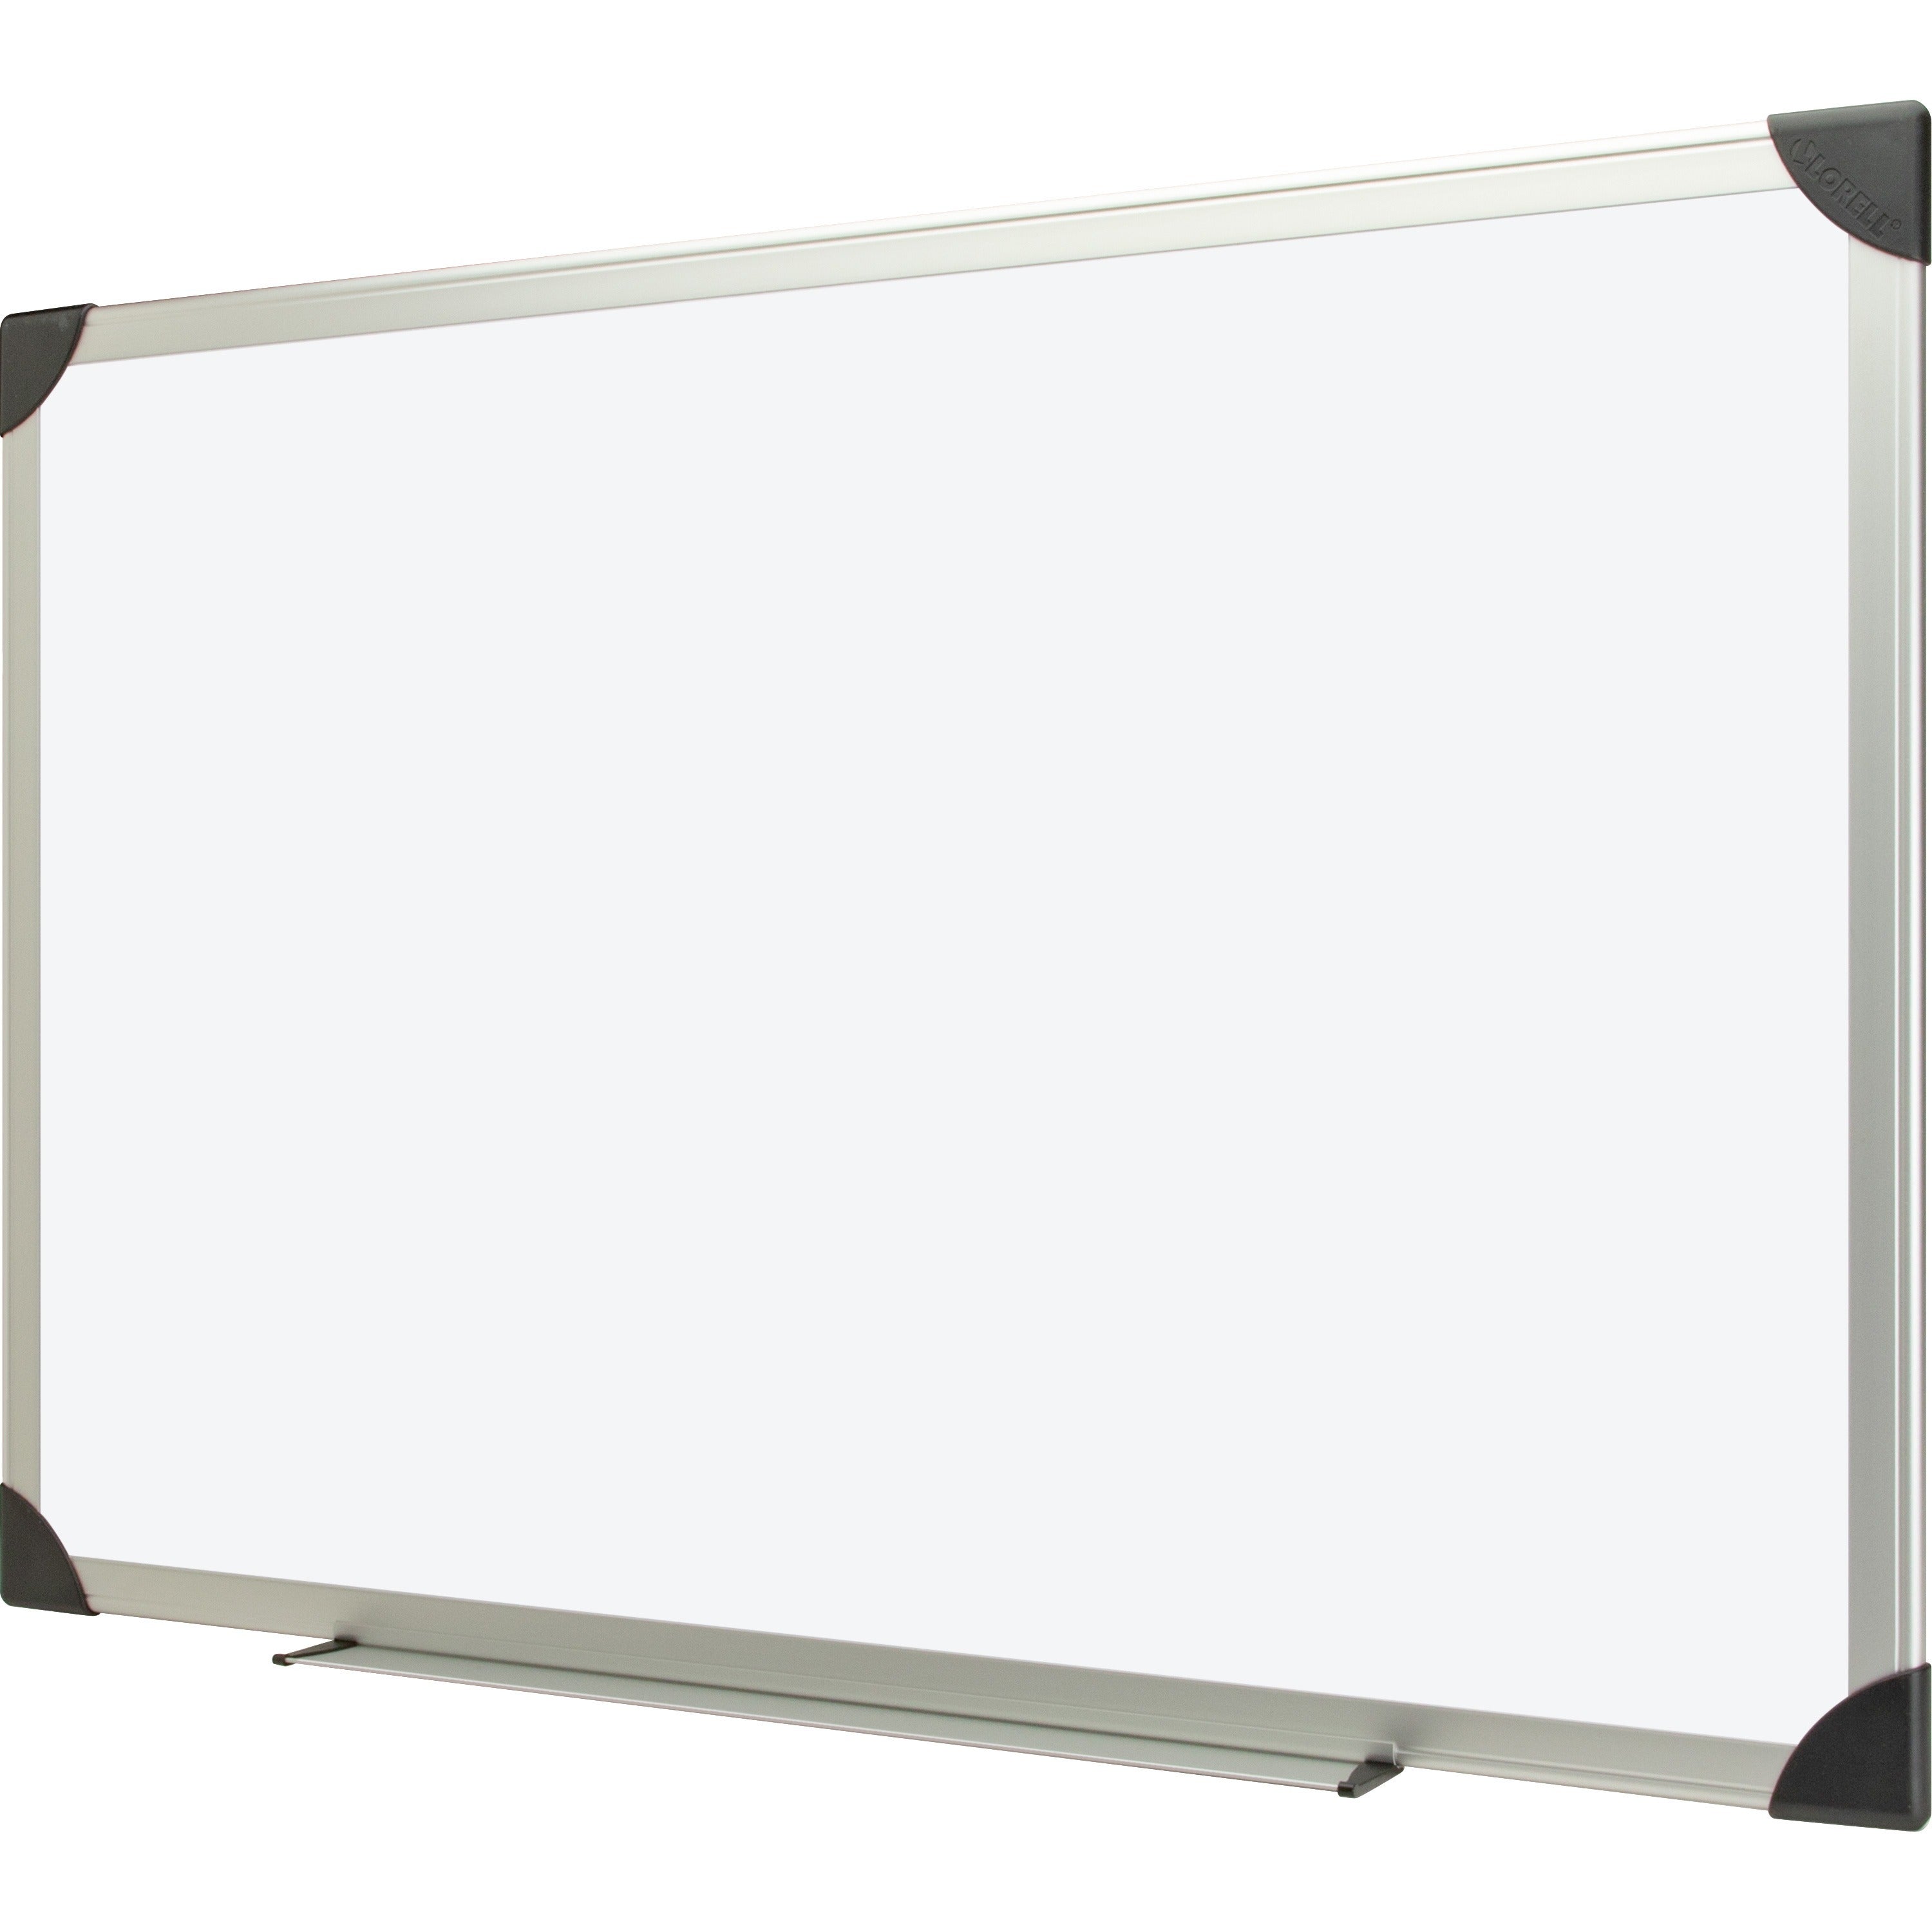 Lorell Dry-erase Board - 48" (4 ft) Width x 36" (3 ft) Height - White Styrene Surface - Aluminum Frame - Ghost Resistant, Scratch Resistant - 1 Each - 